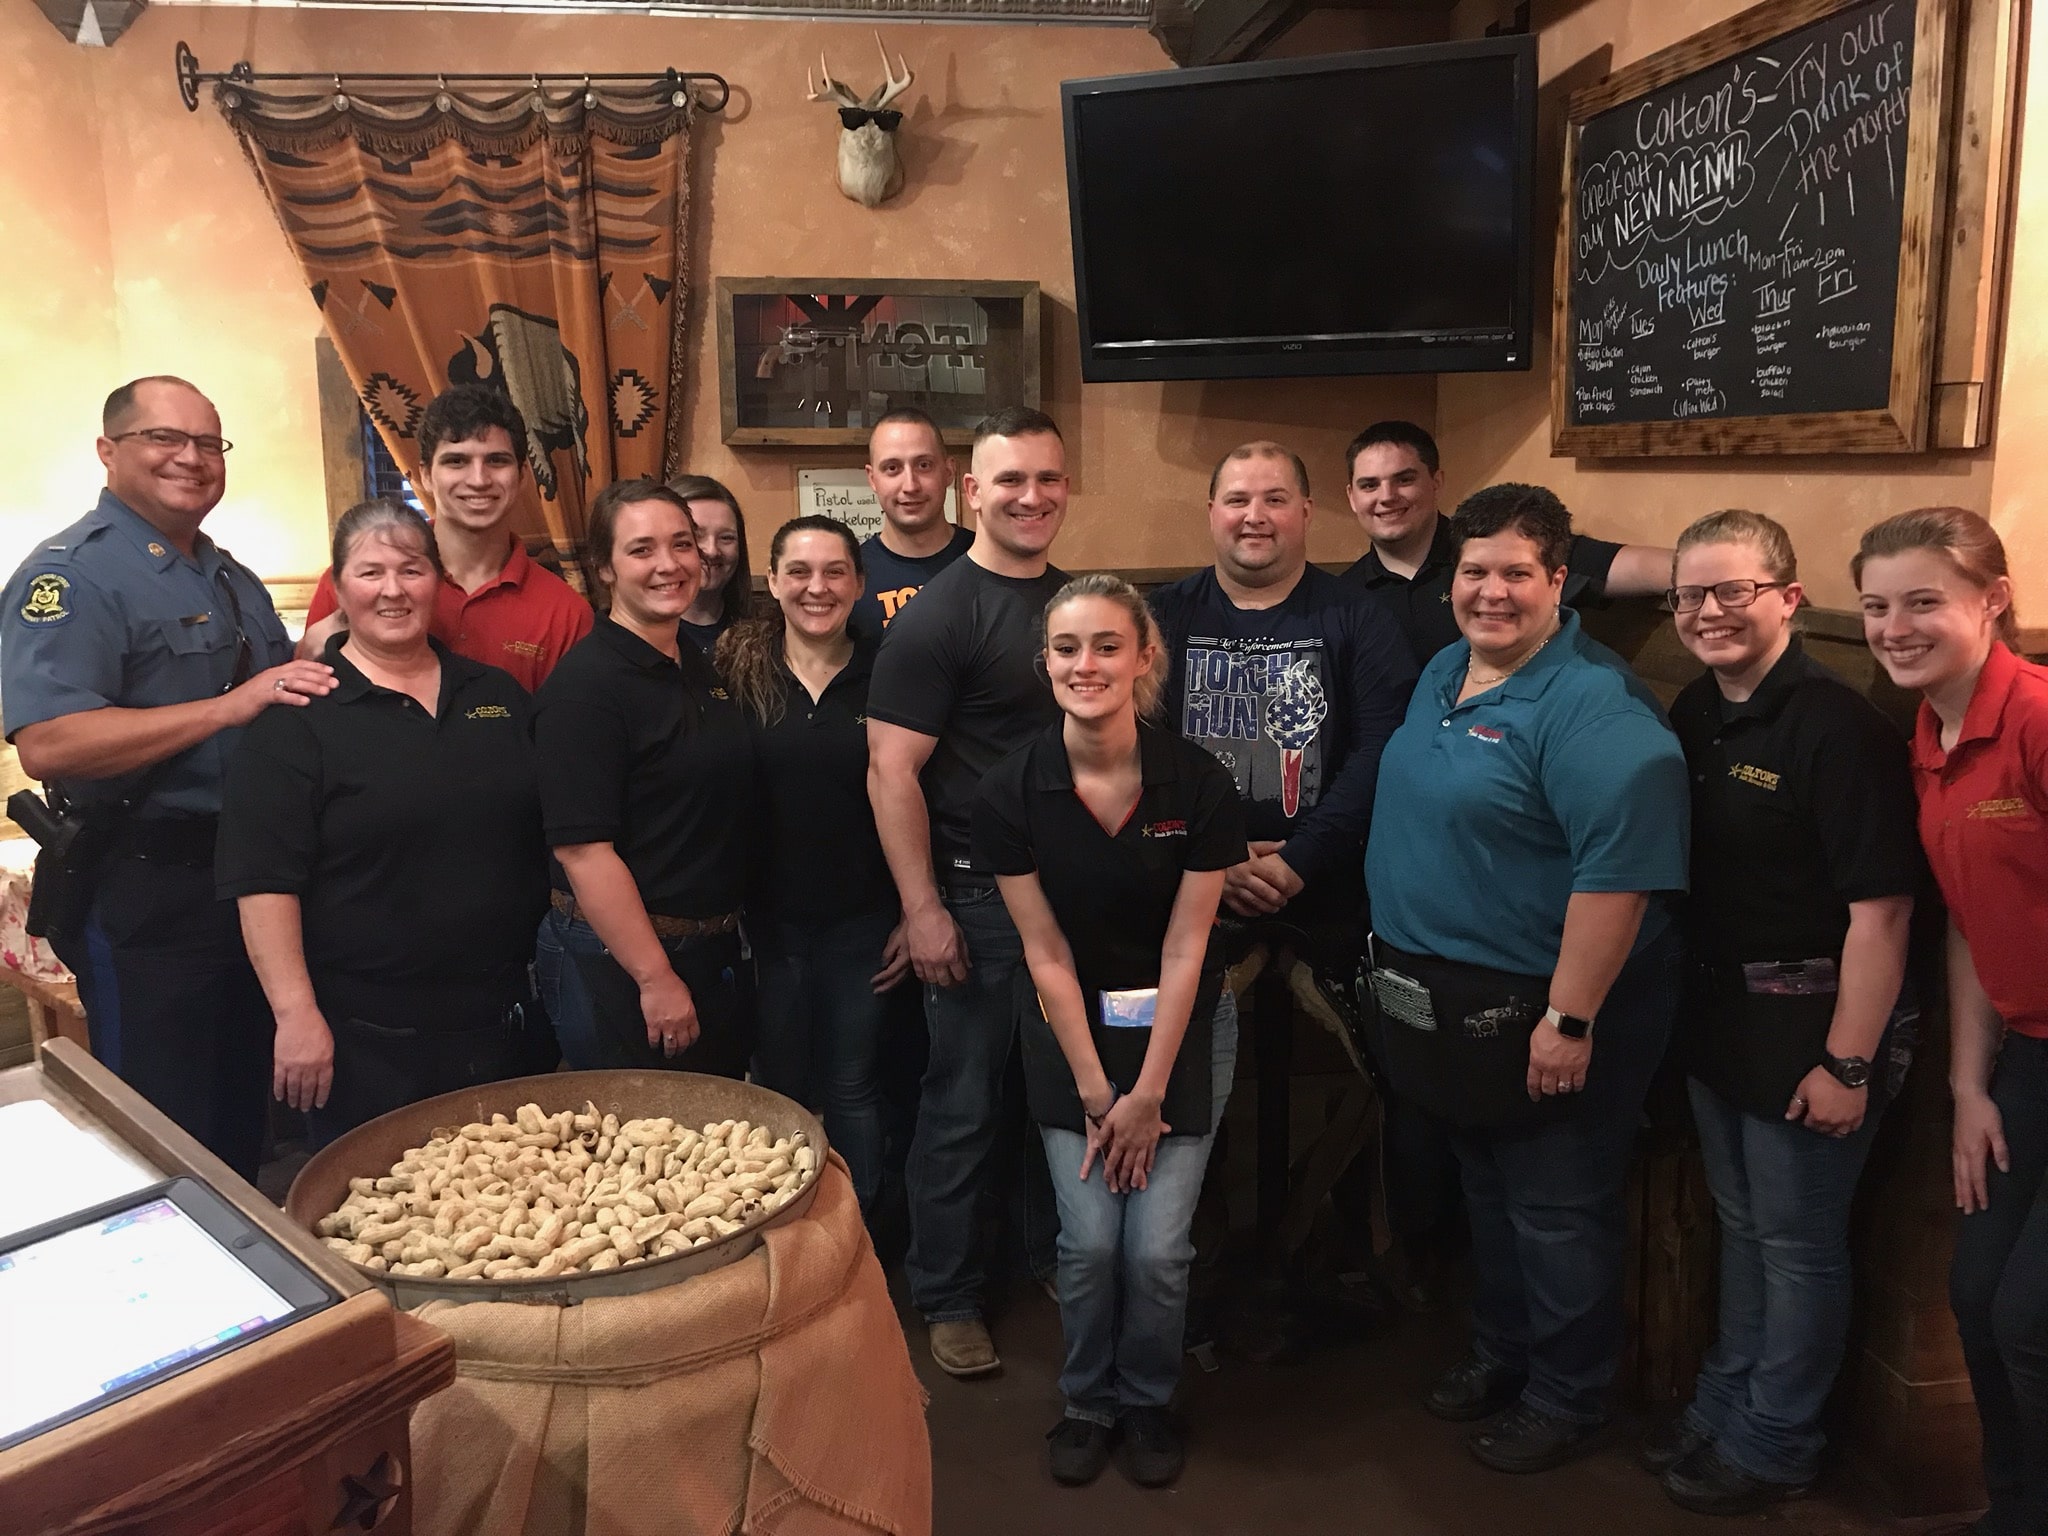 A group of law enforcement officers and servers pose for a photo in a restaurant